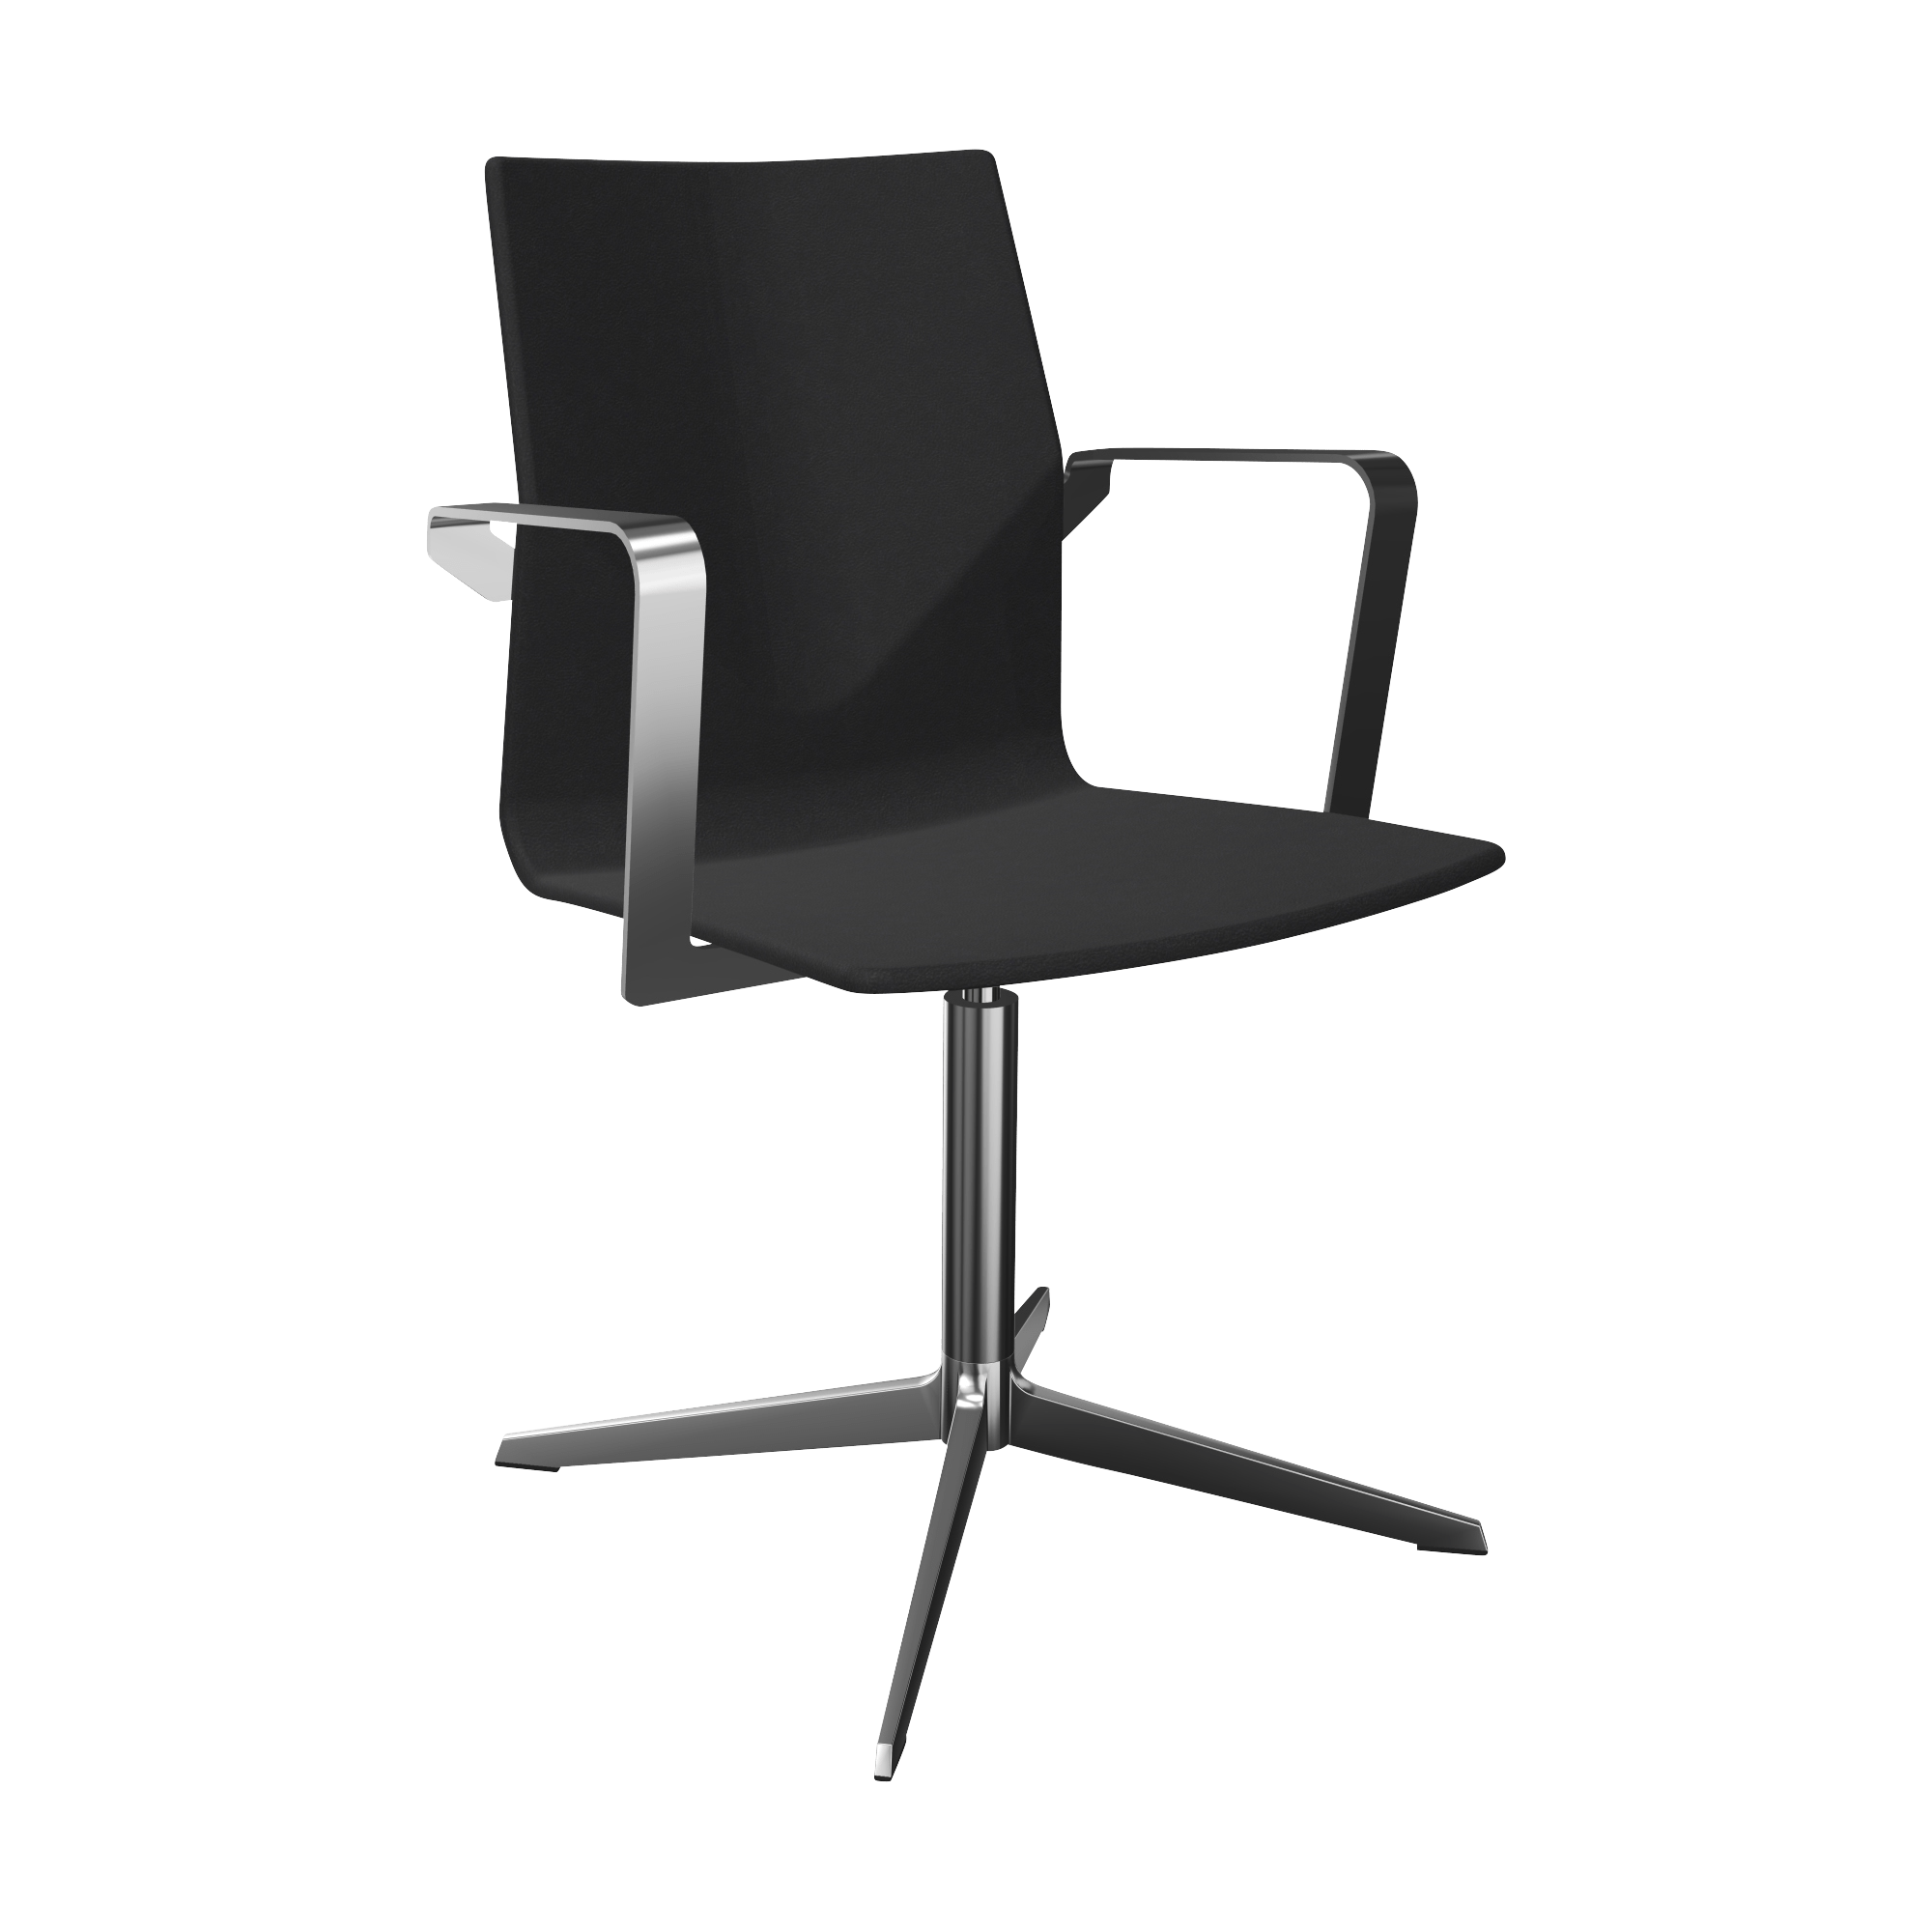 A black office chair with arm rests with a pedestal leg